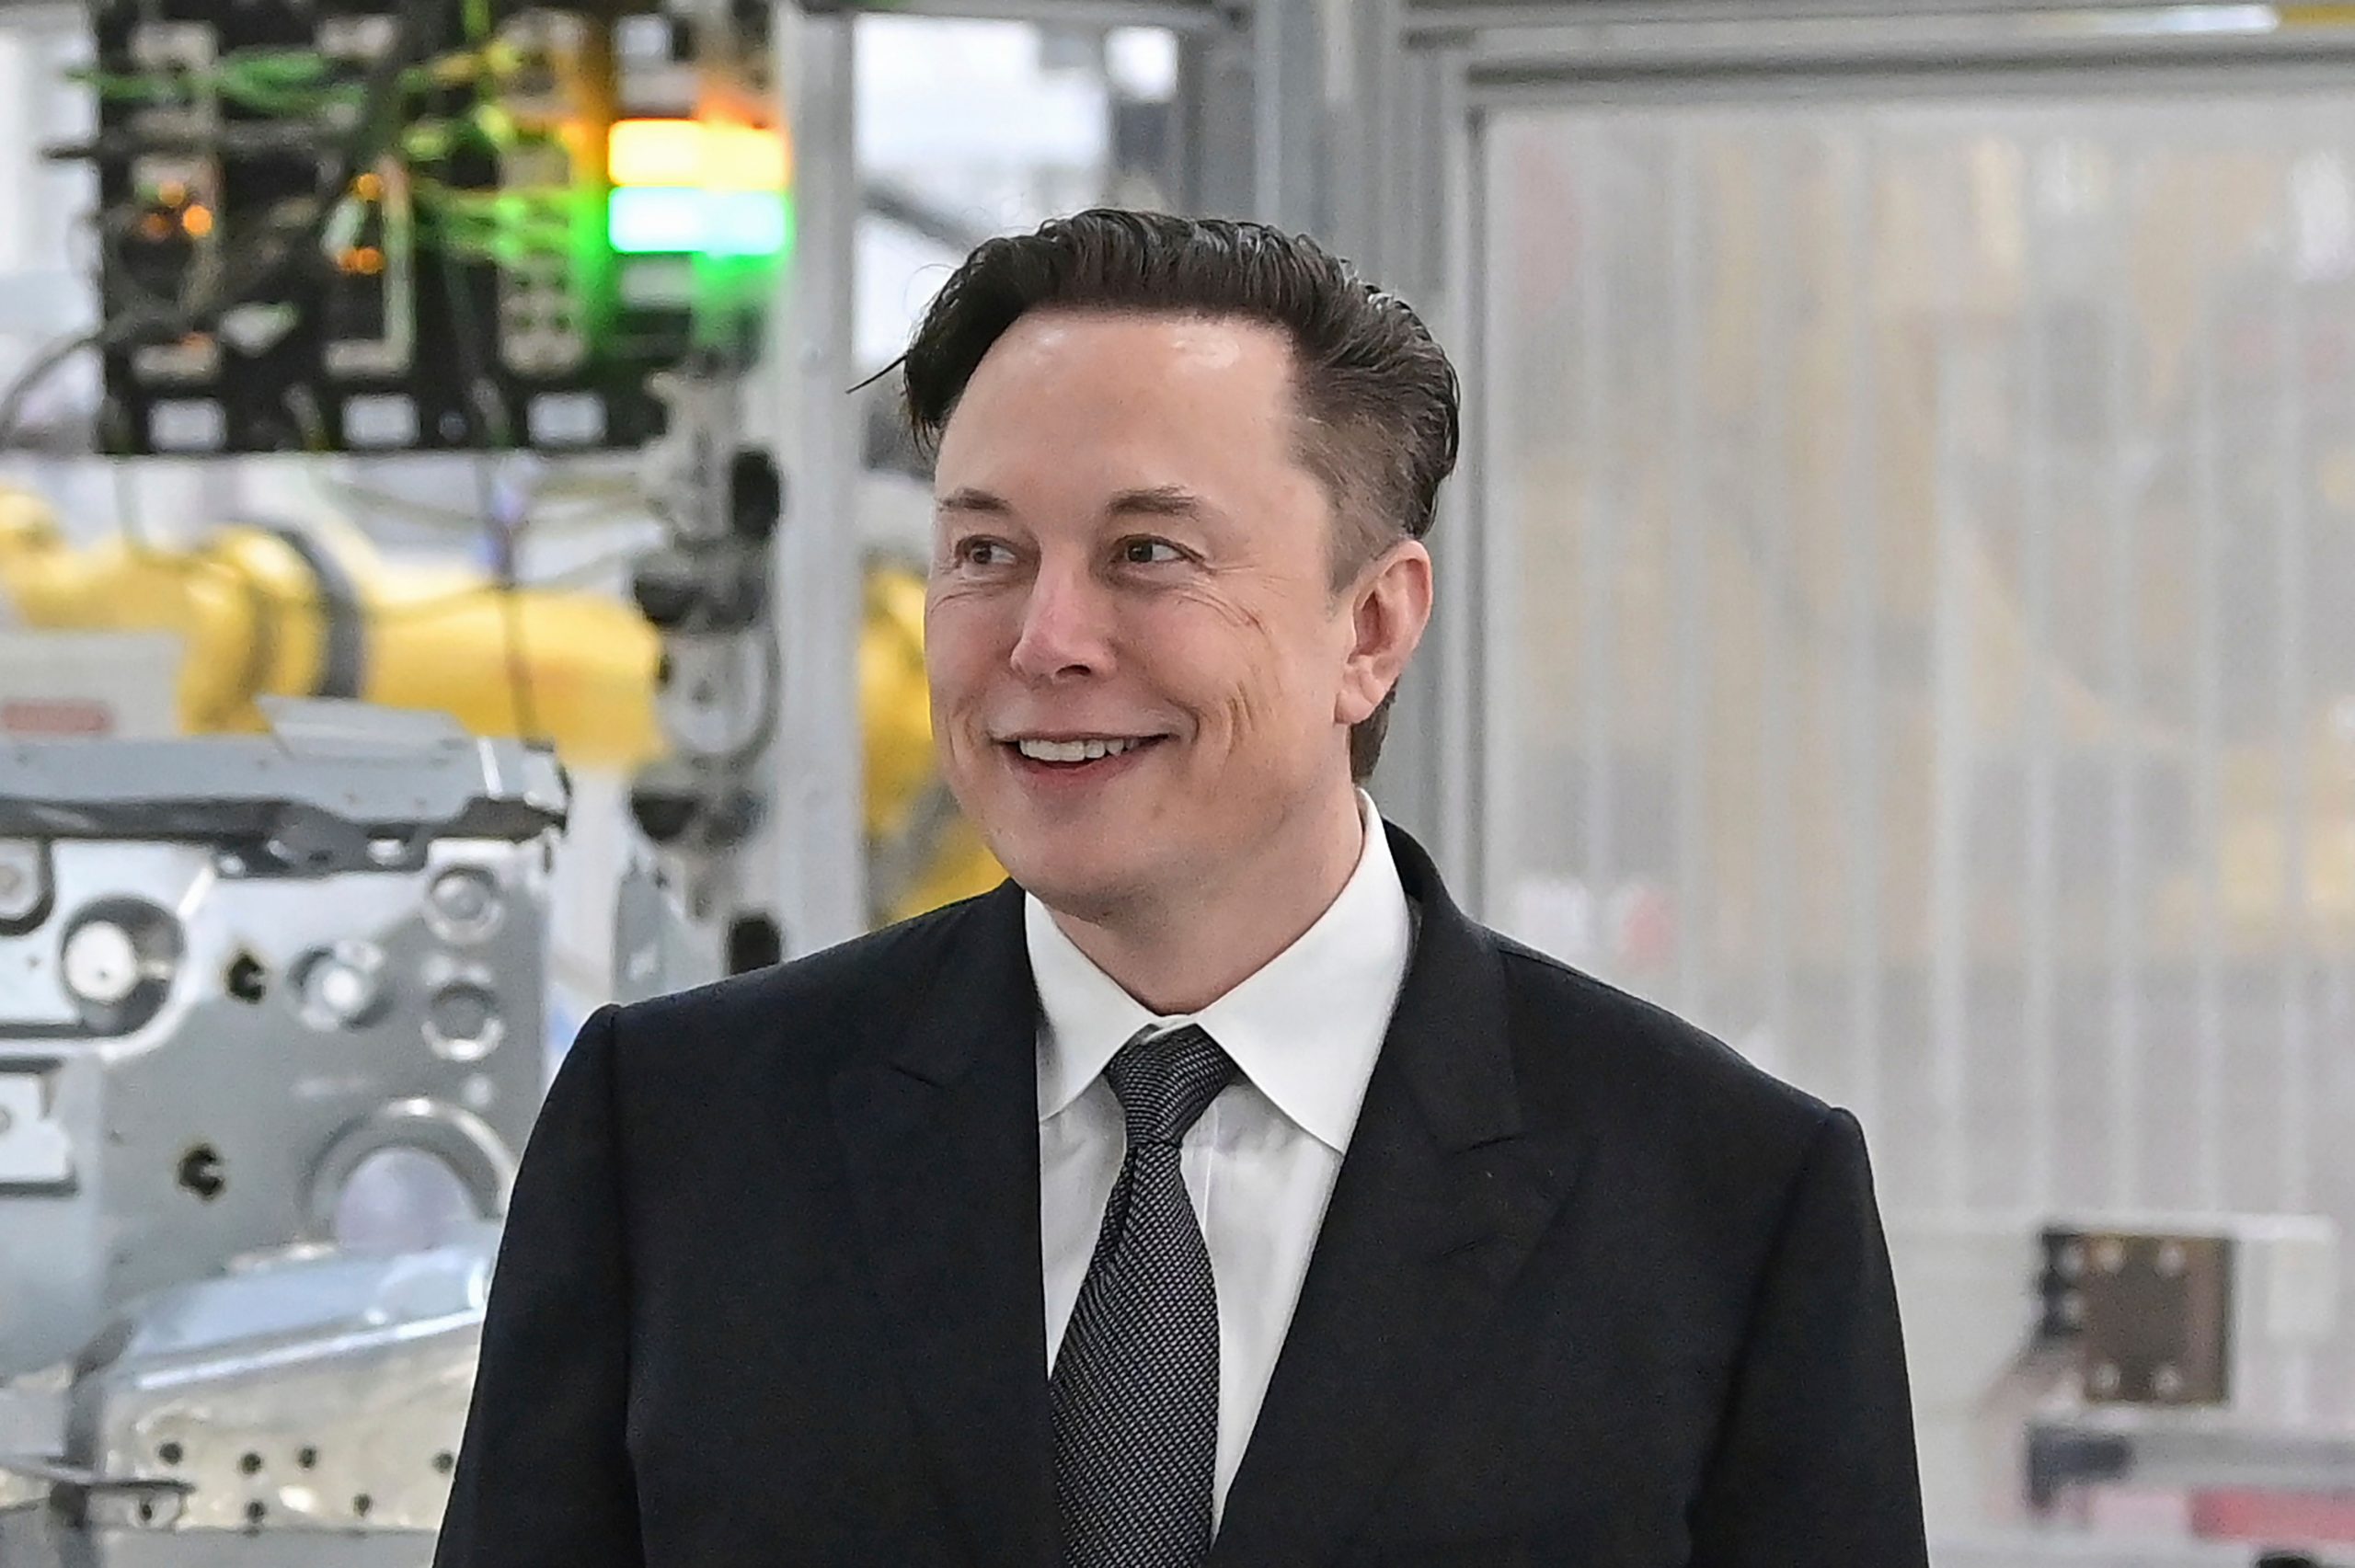 Elon Musk confirms buying Twitter for $44B to enable ‘healthy’ debate of ideas